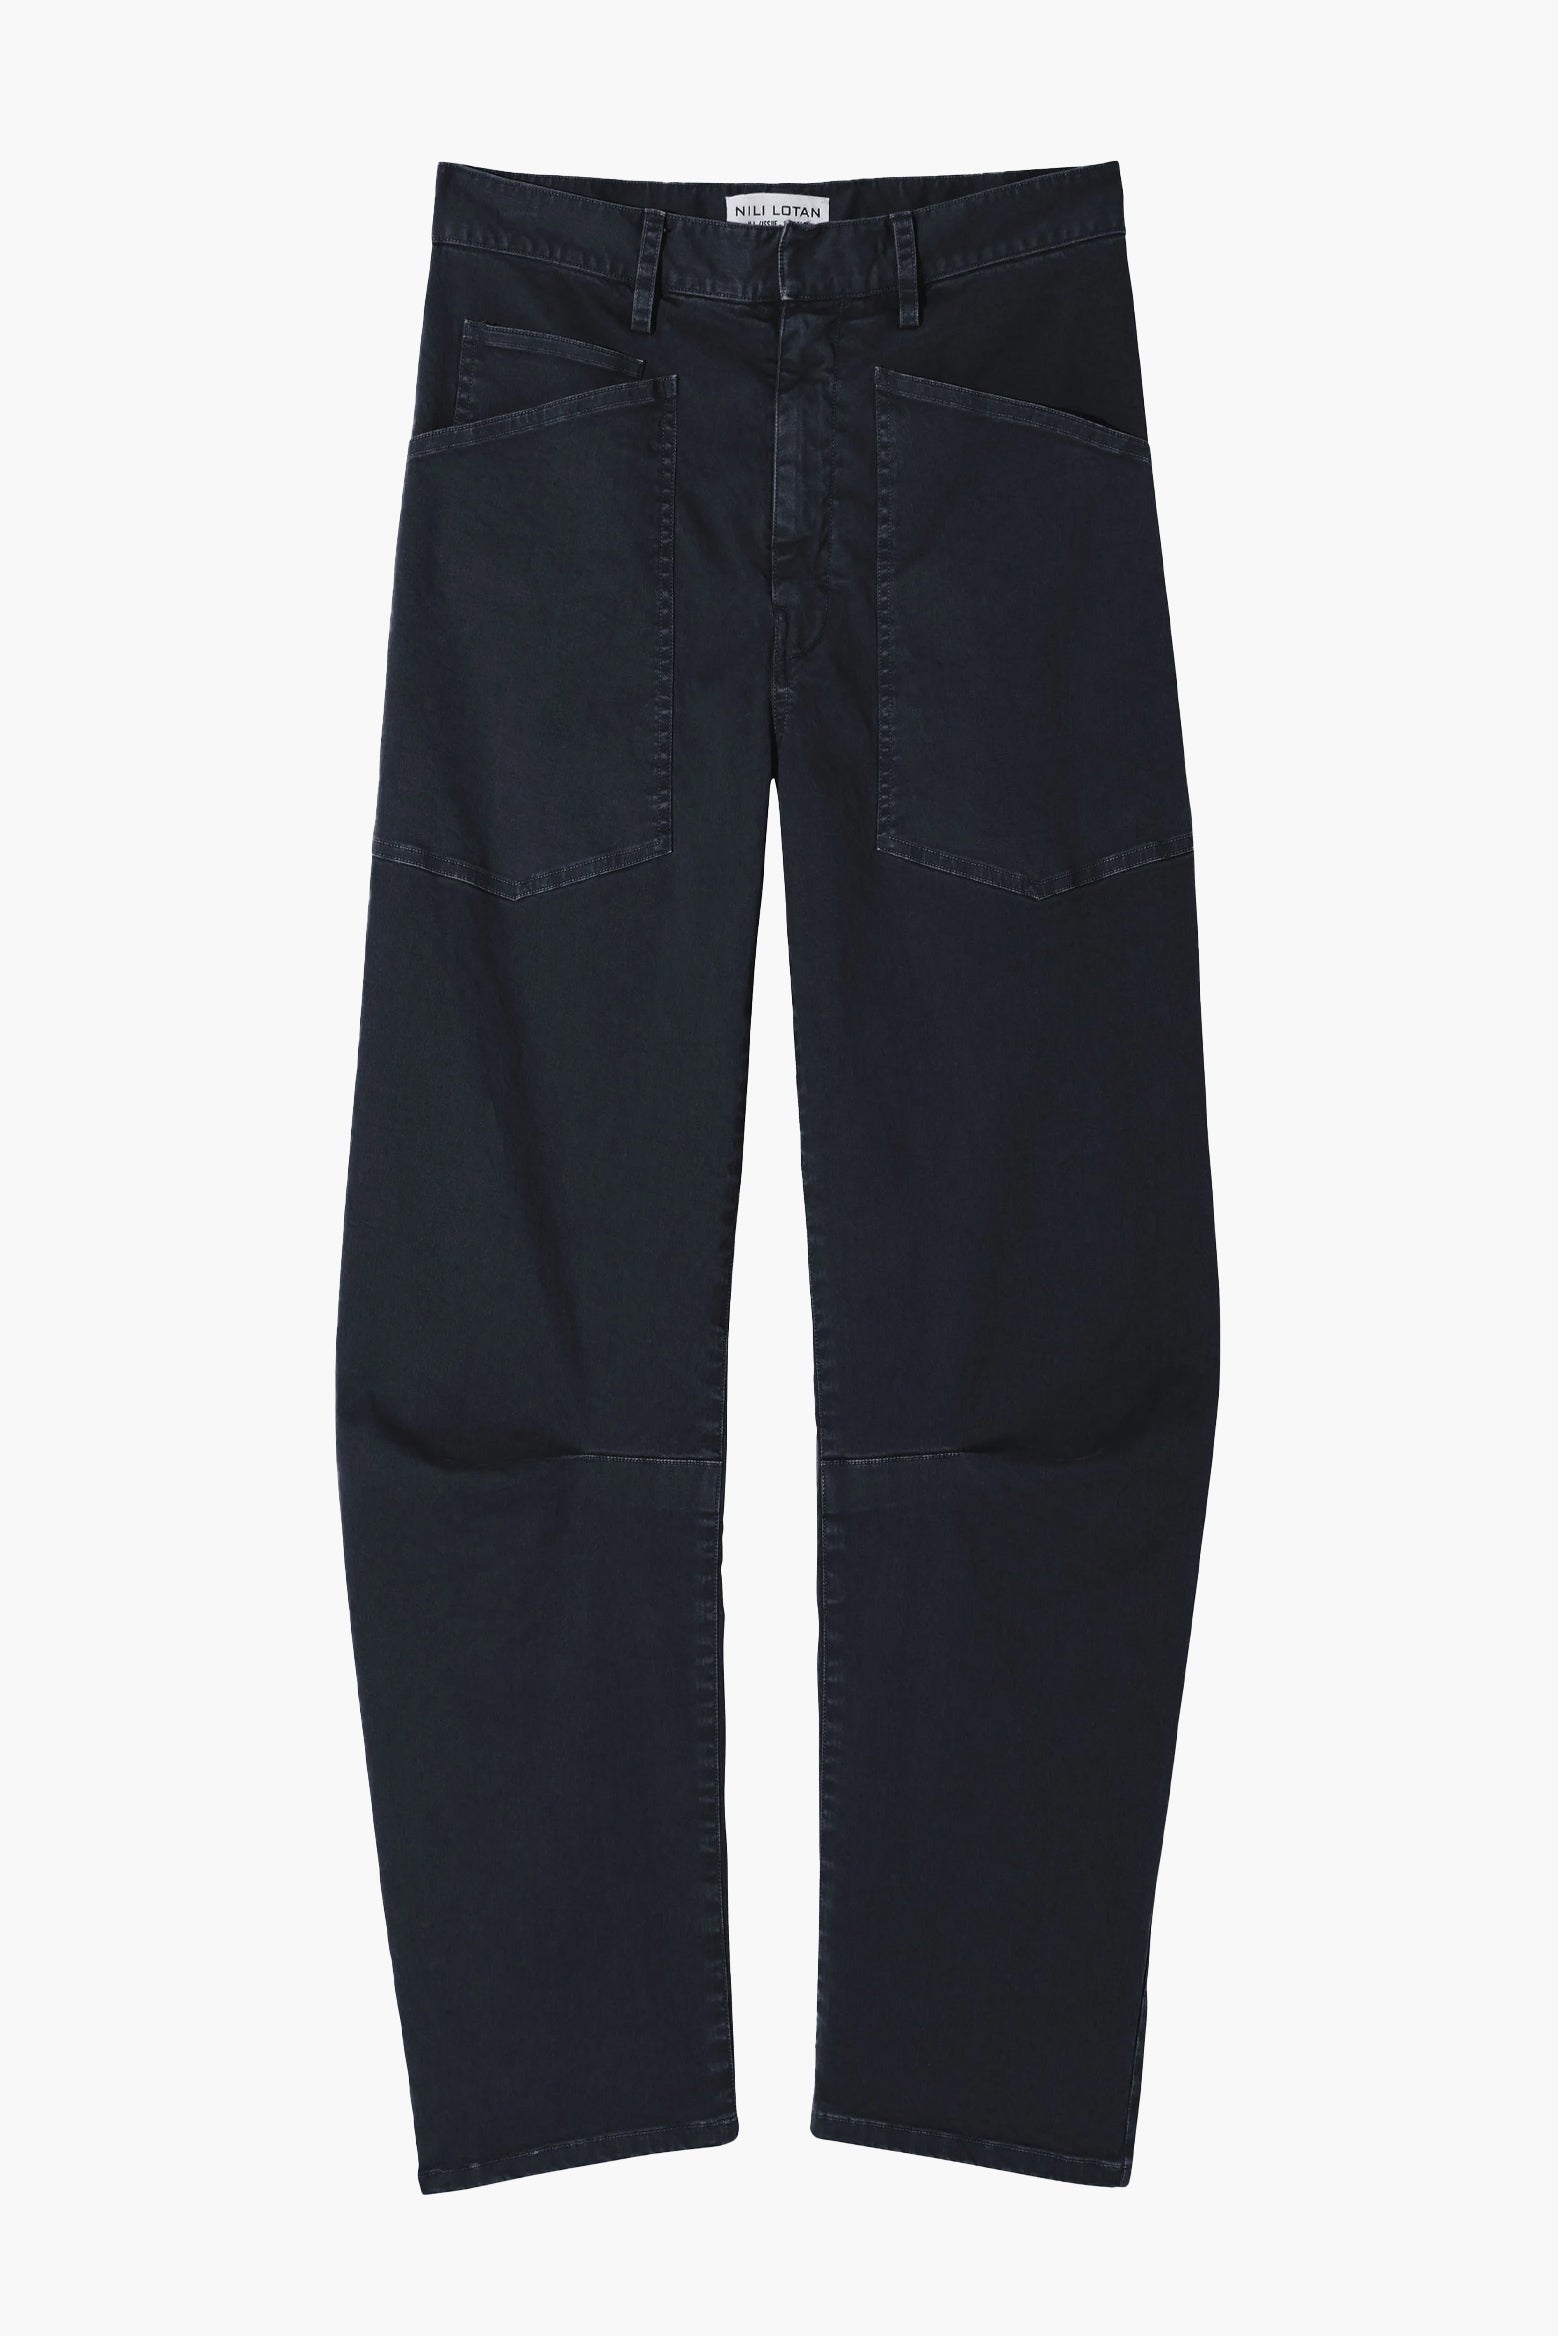 Nilli Lotan Shon Pant in Midnight available at The New Trend Australia. 